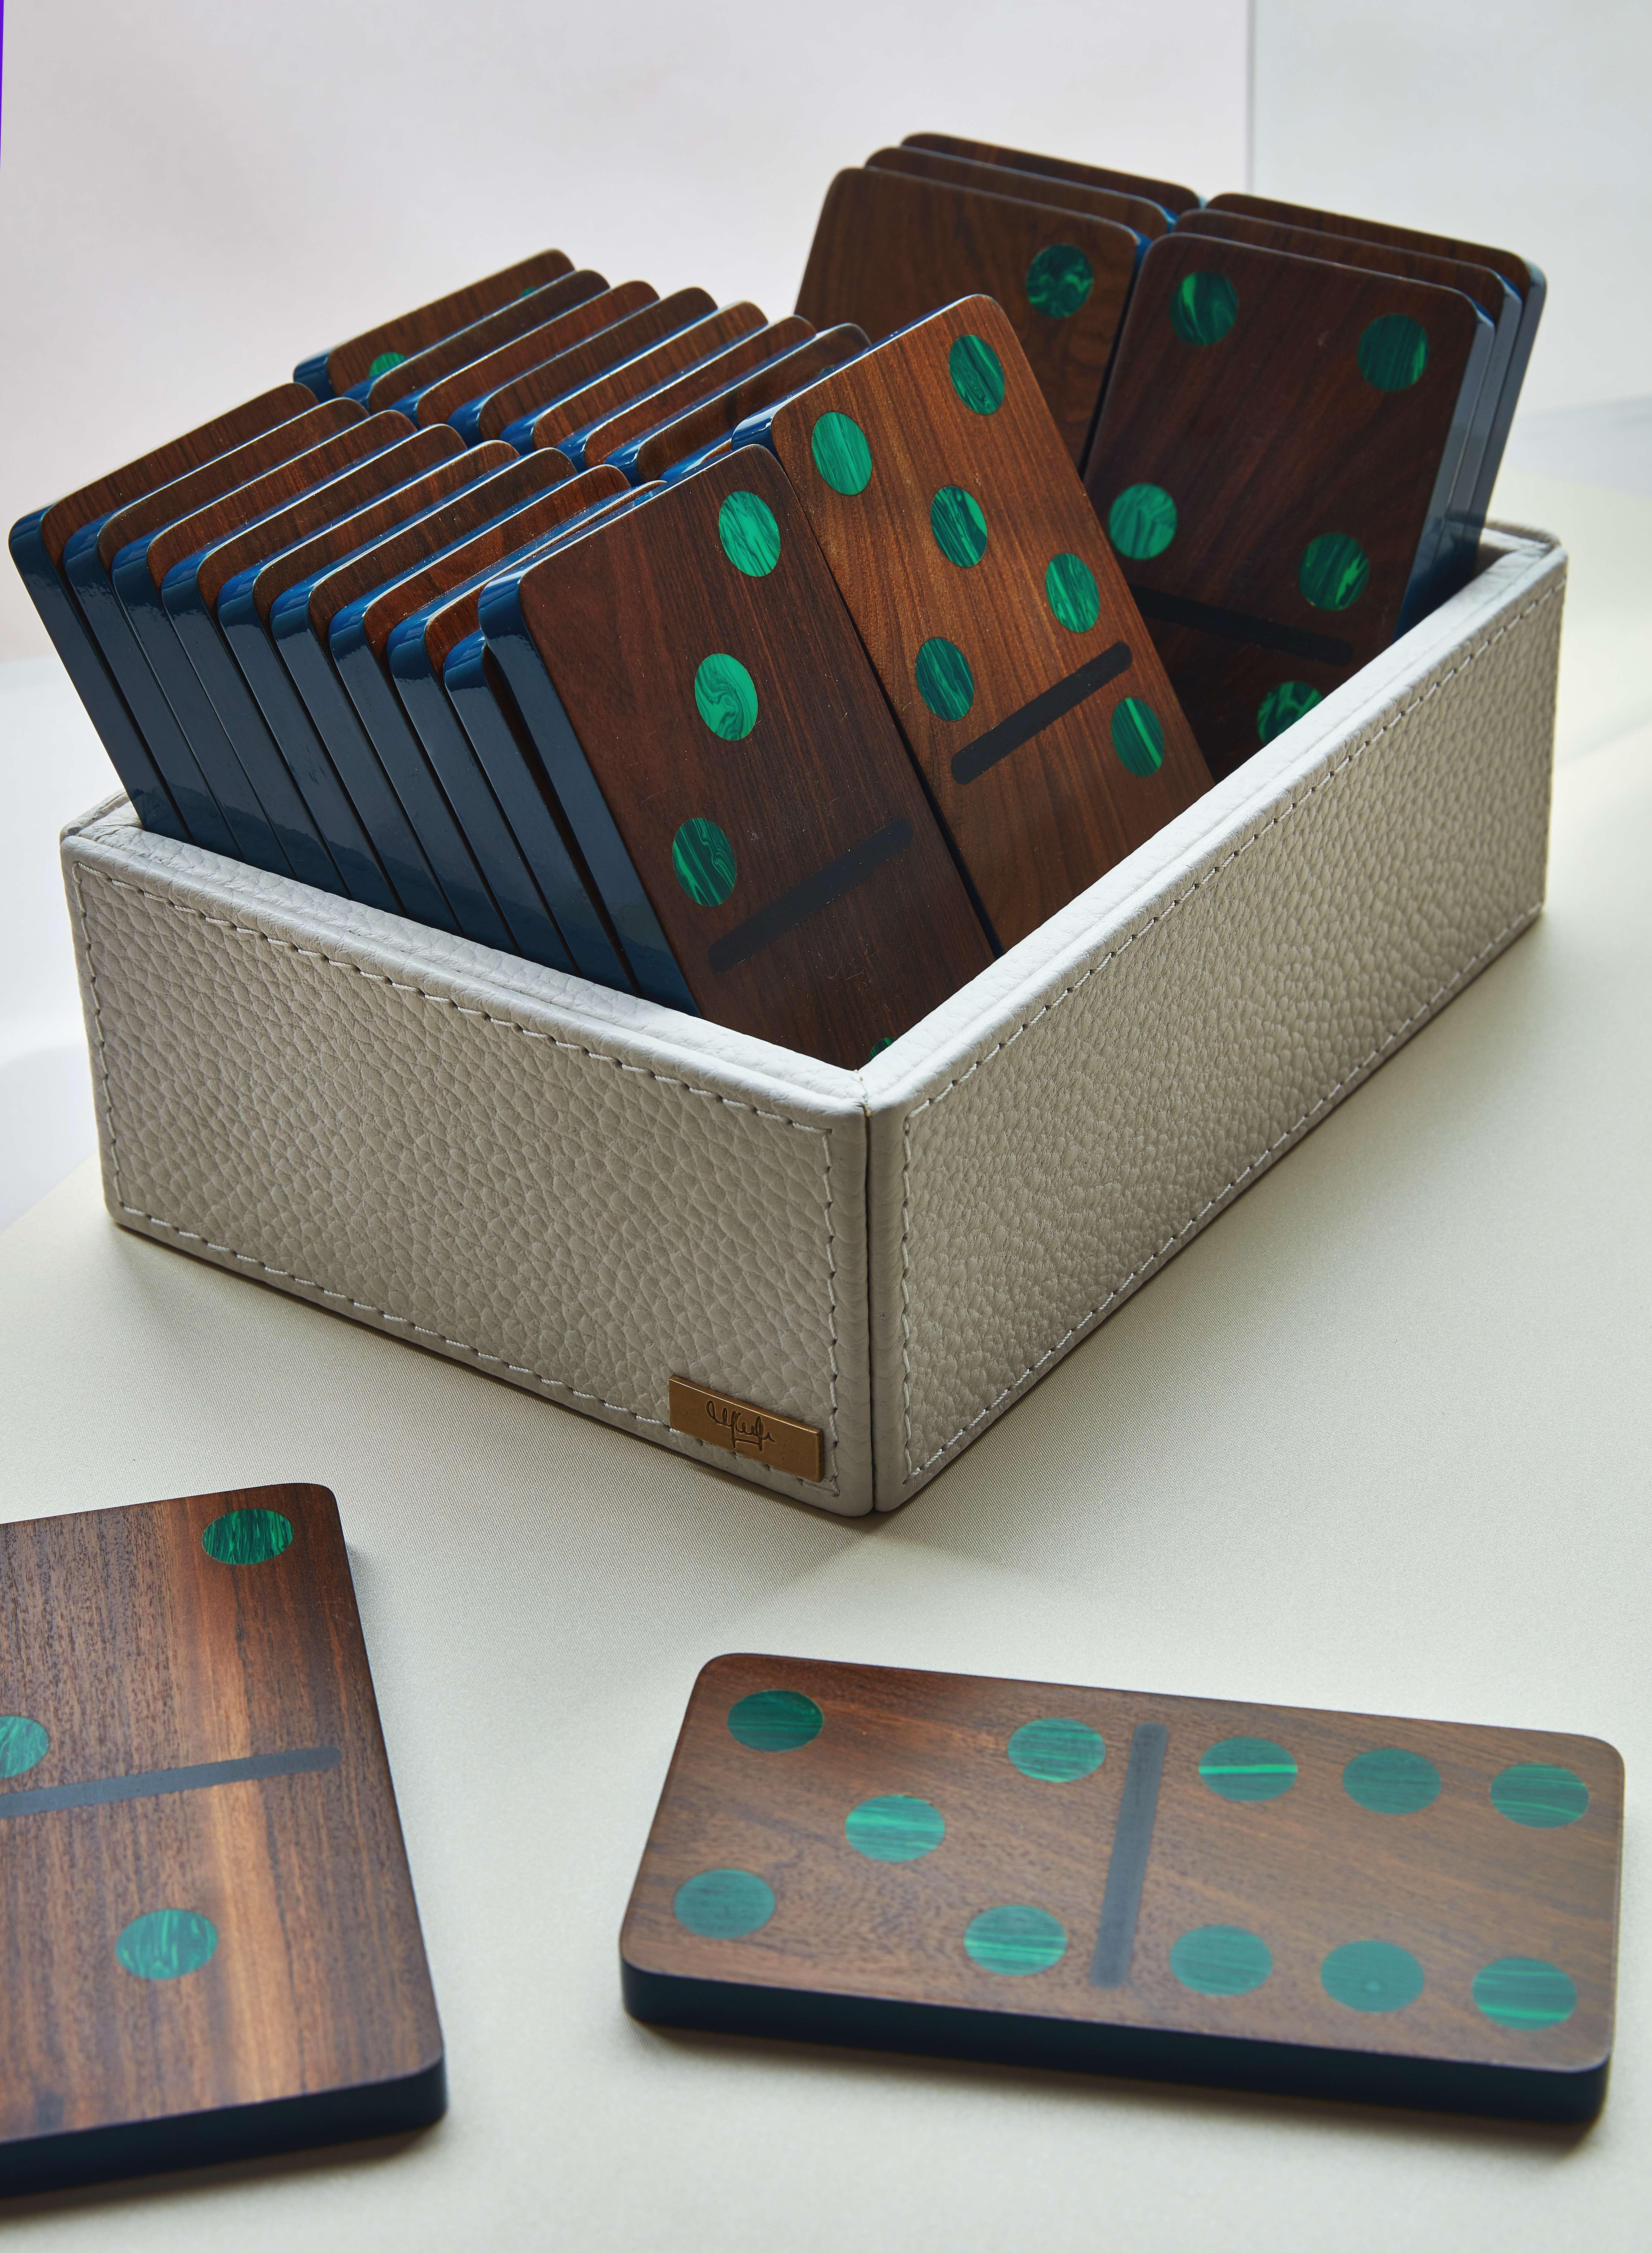 Other Marcela Cure XL Pui Wood and Malachite Domino Set - 28 Pieces in leather box For Sale